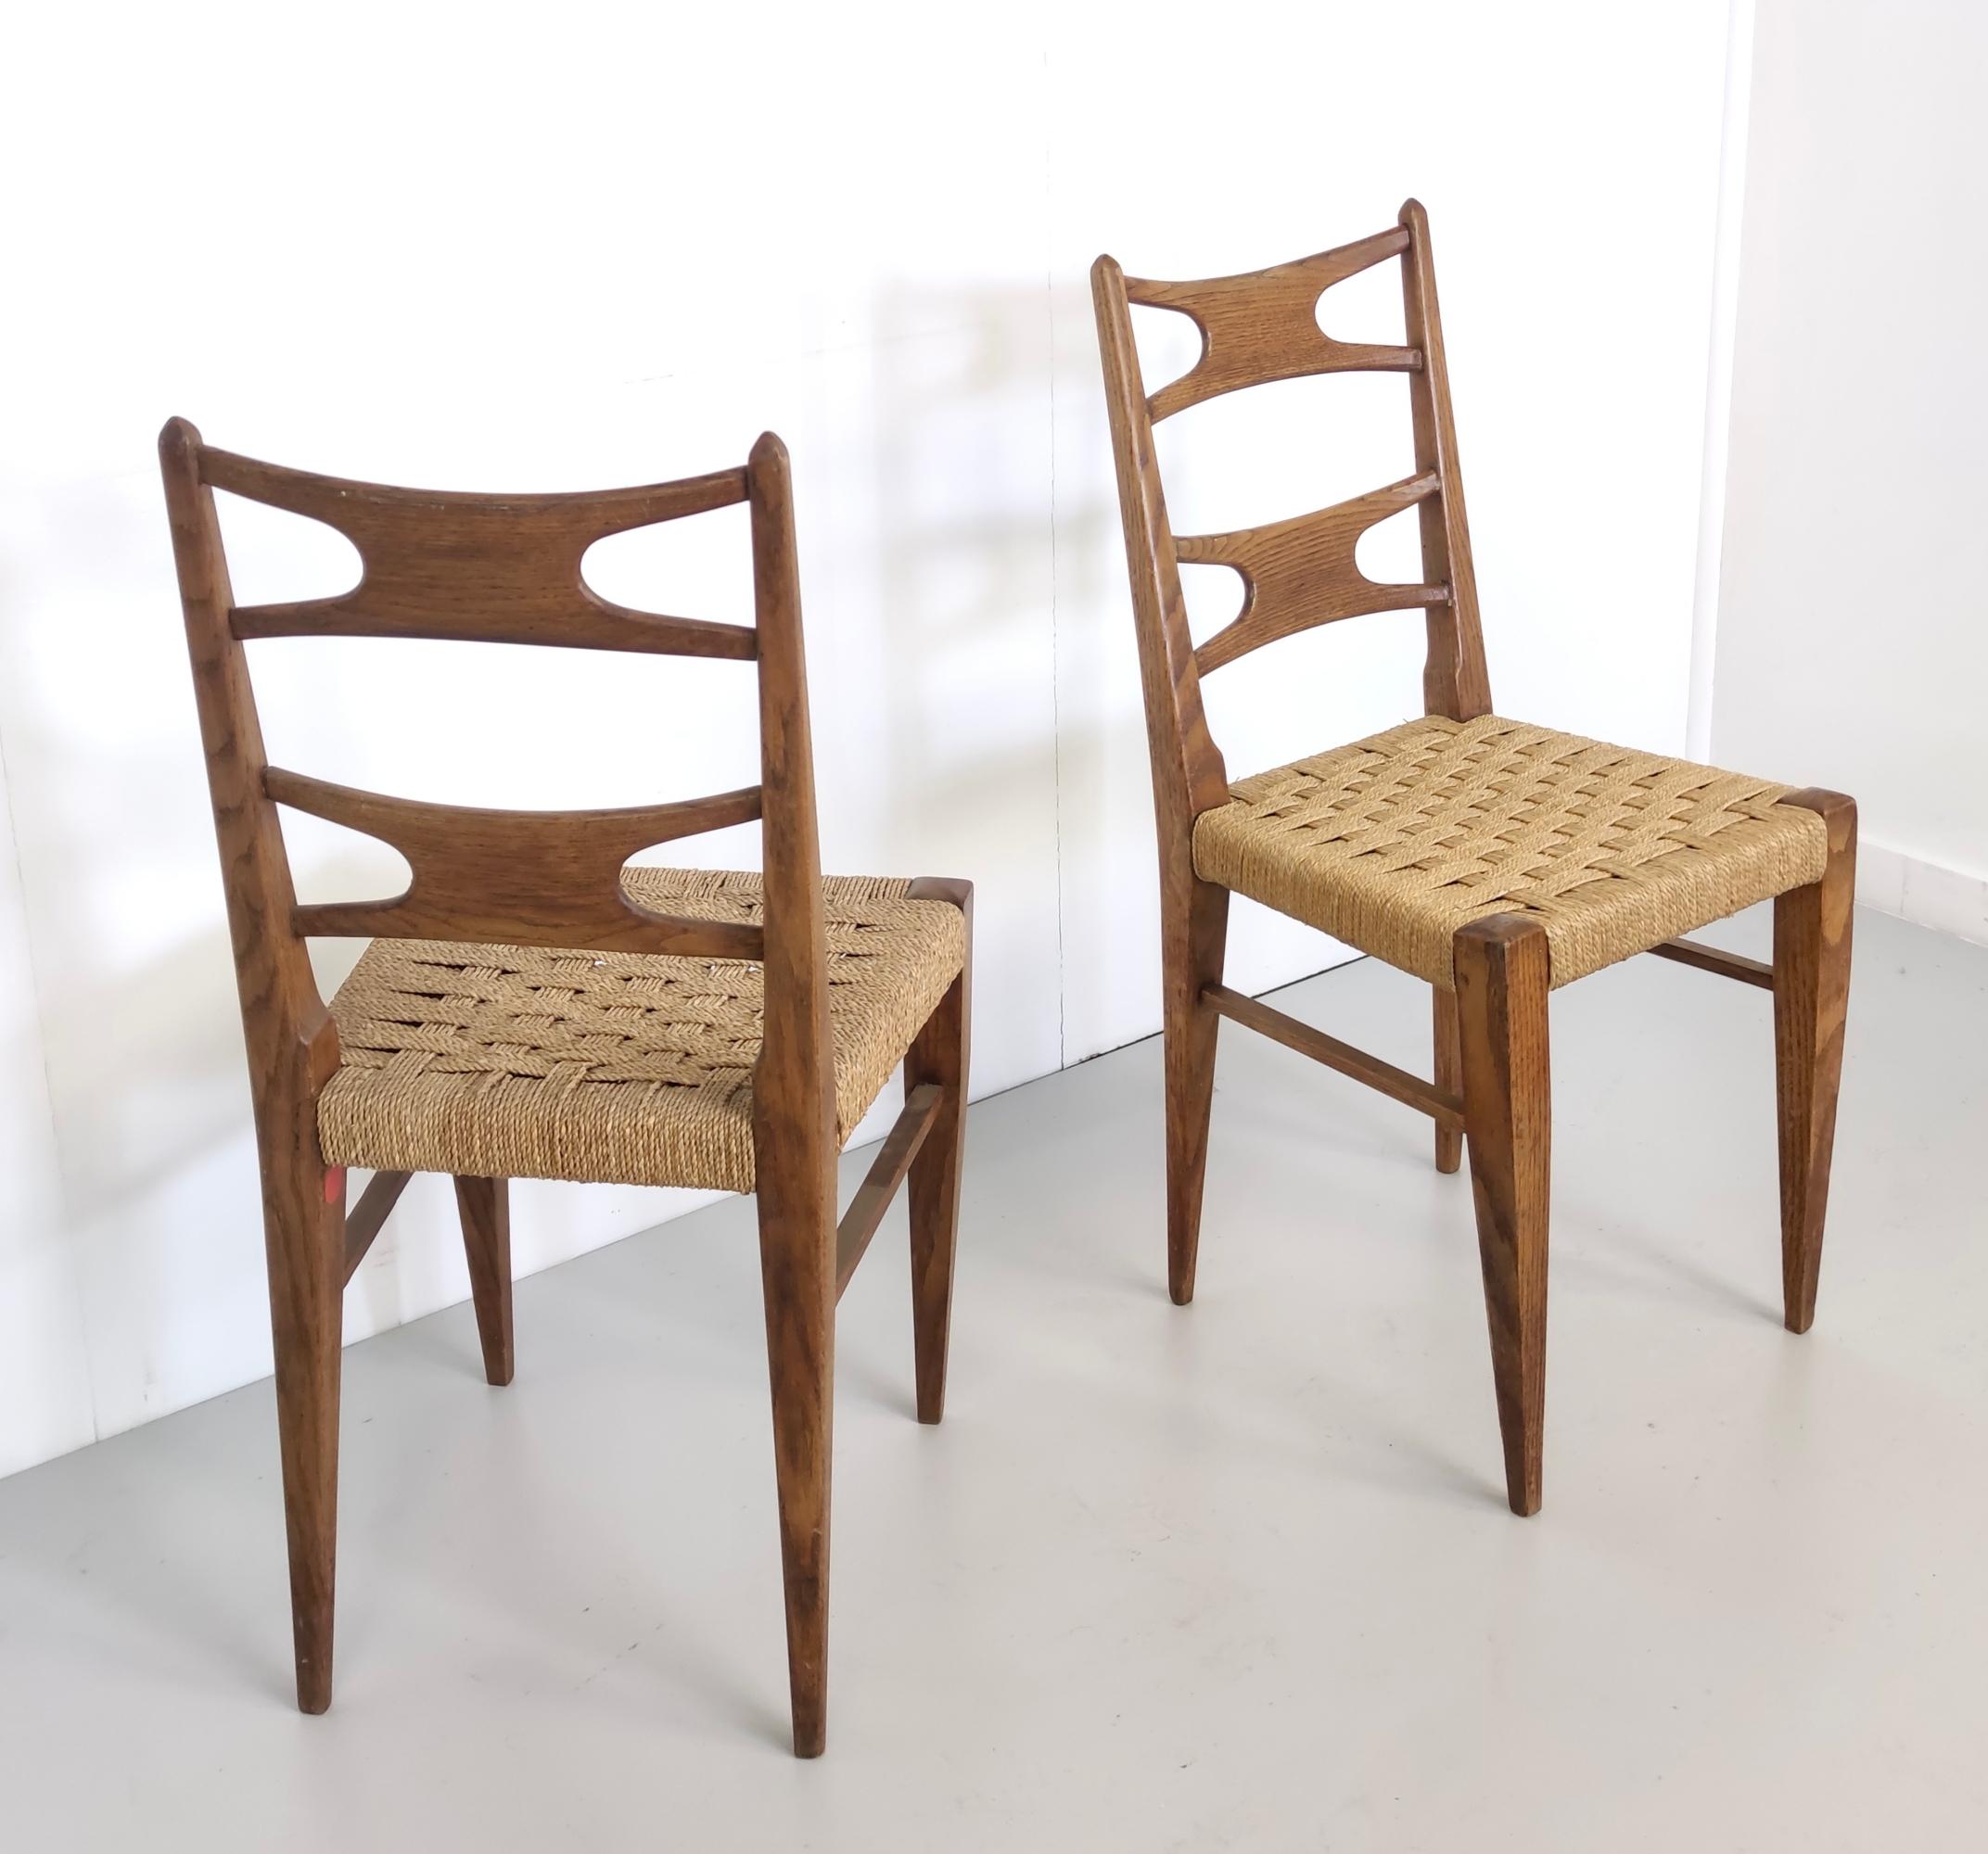 Pair of Vintage Solid Durmast and Rattan Chairs, Italy In Good Condition For Sale In Bresso, Lombardy